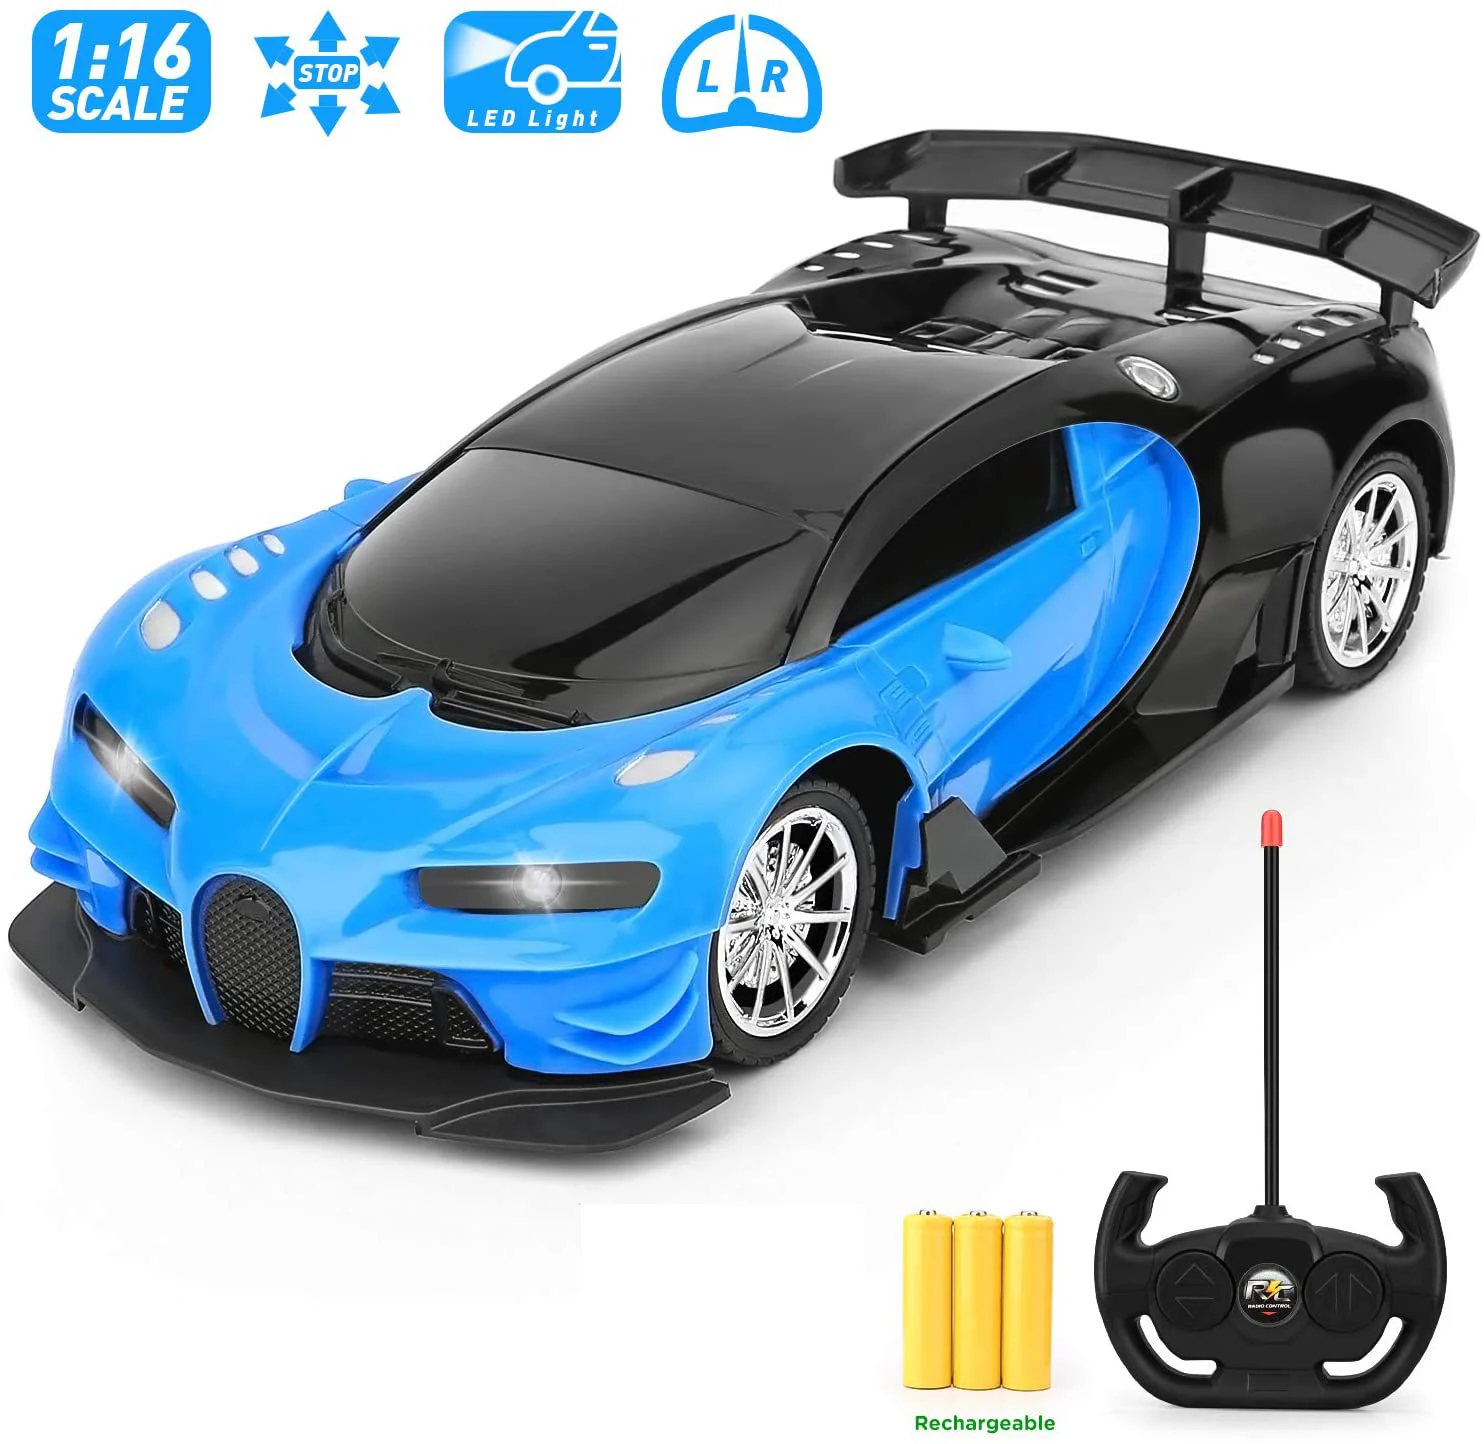 Growsly Remote Control Car RC Car for Kids Toy 1/16 Scale 2.4 GHZ Off Road Vehicle High Speed Racing Car Rechargeable Hobby RC Trucks 